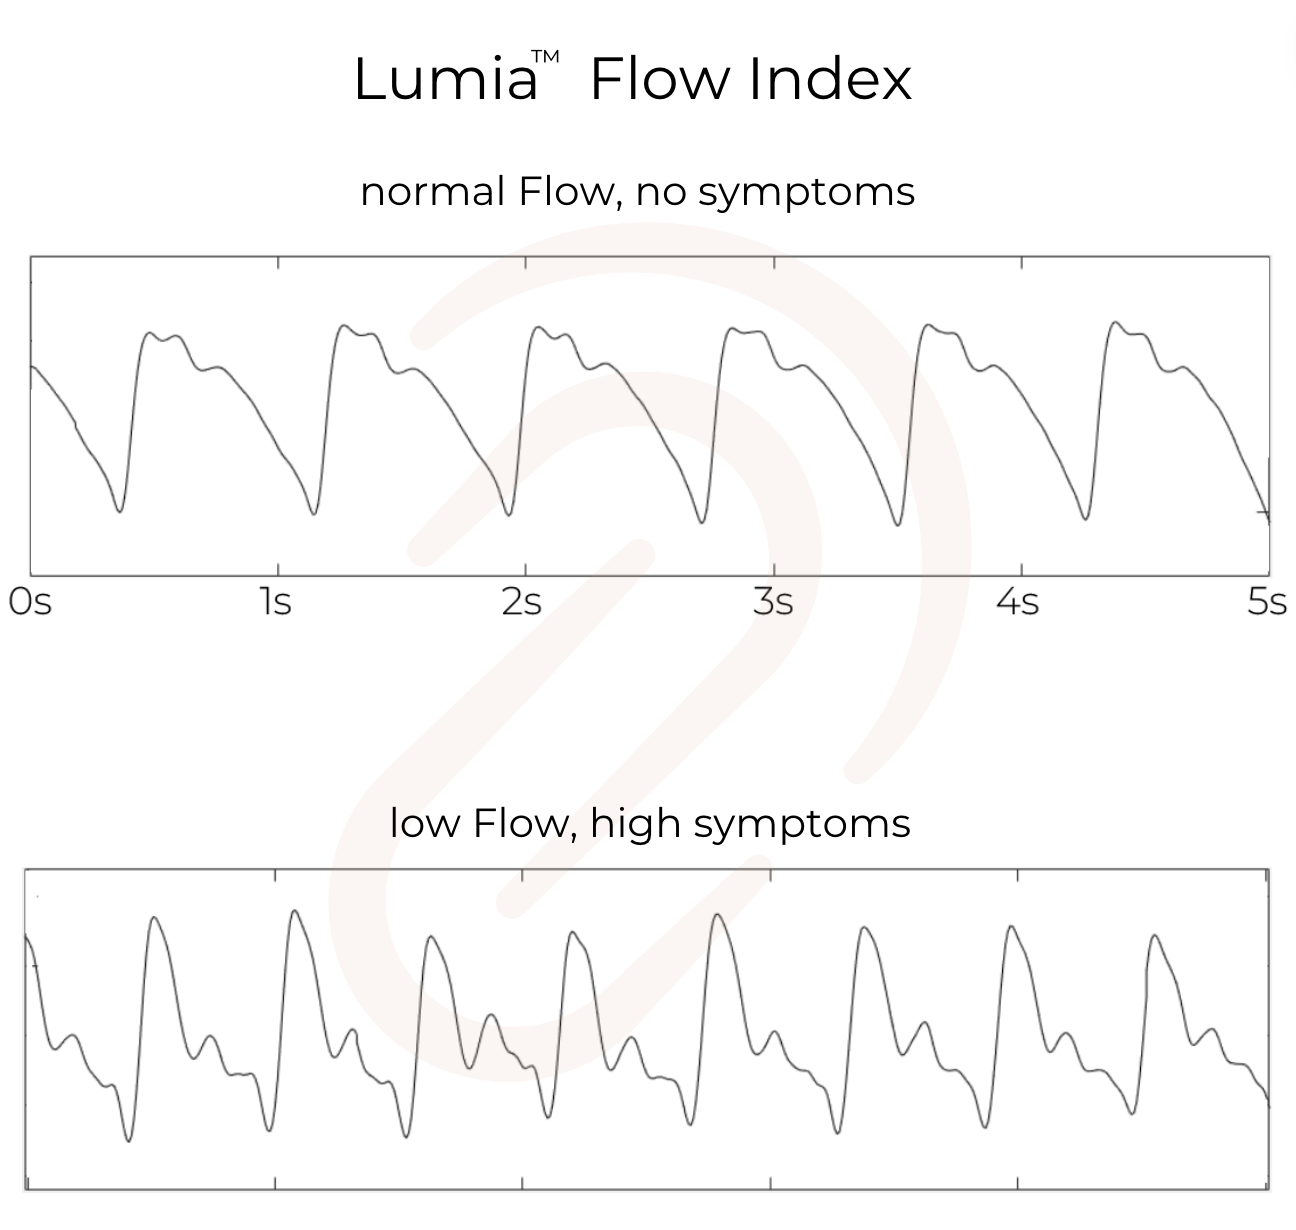 Lumia Flow Index is wave form analysis proxy for CBF Cerebral Blood Flow